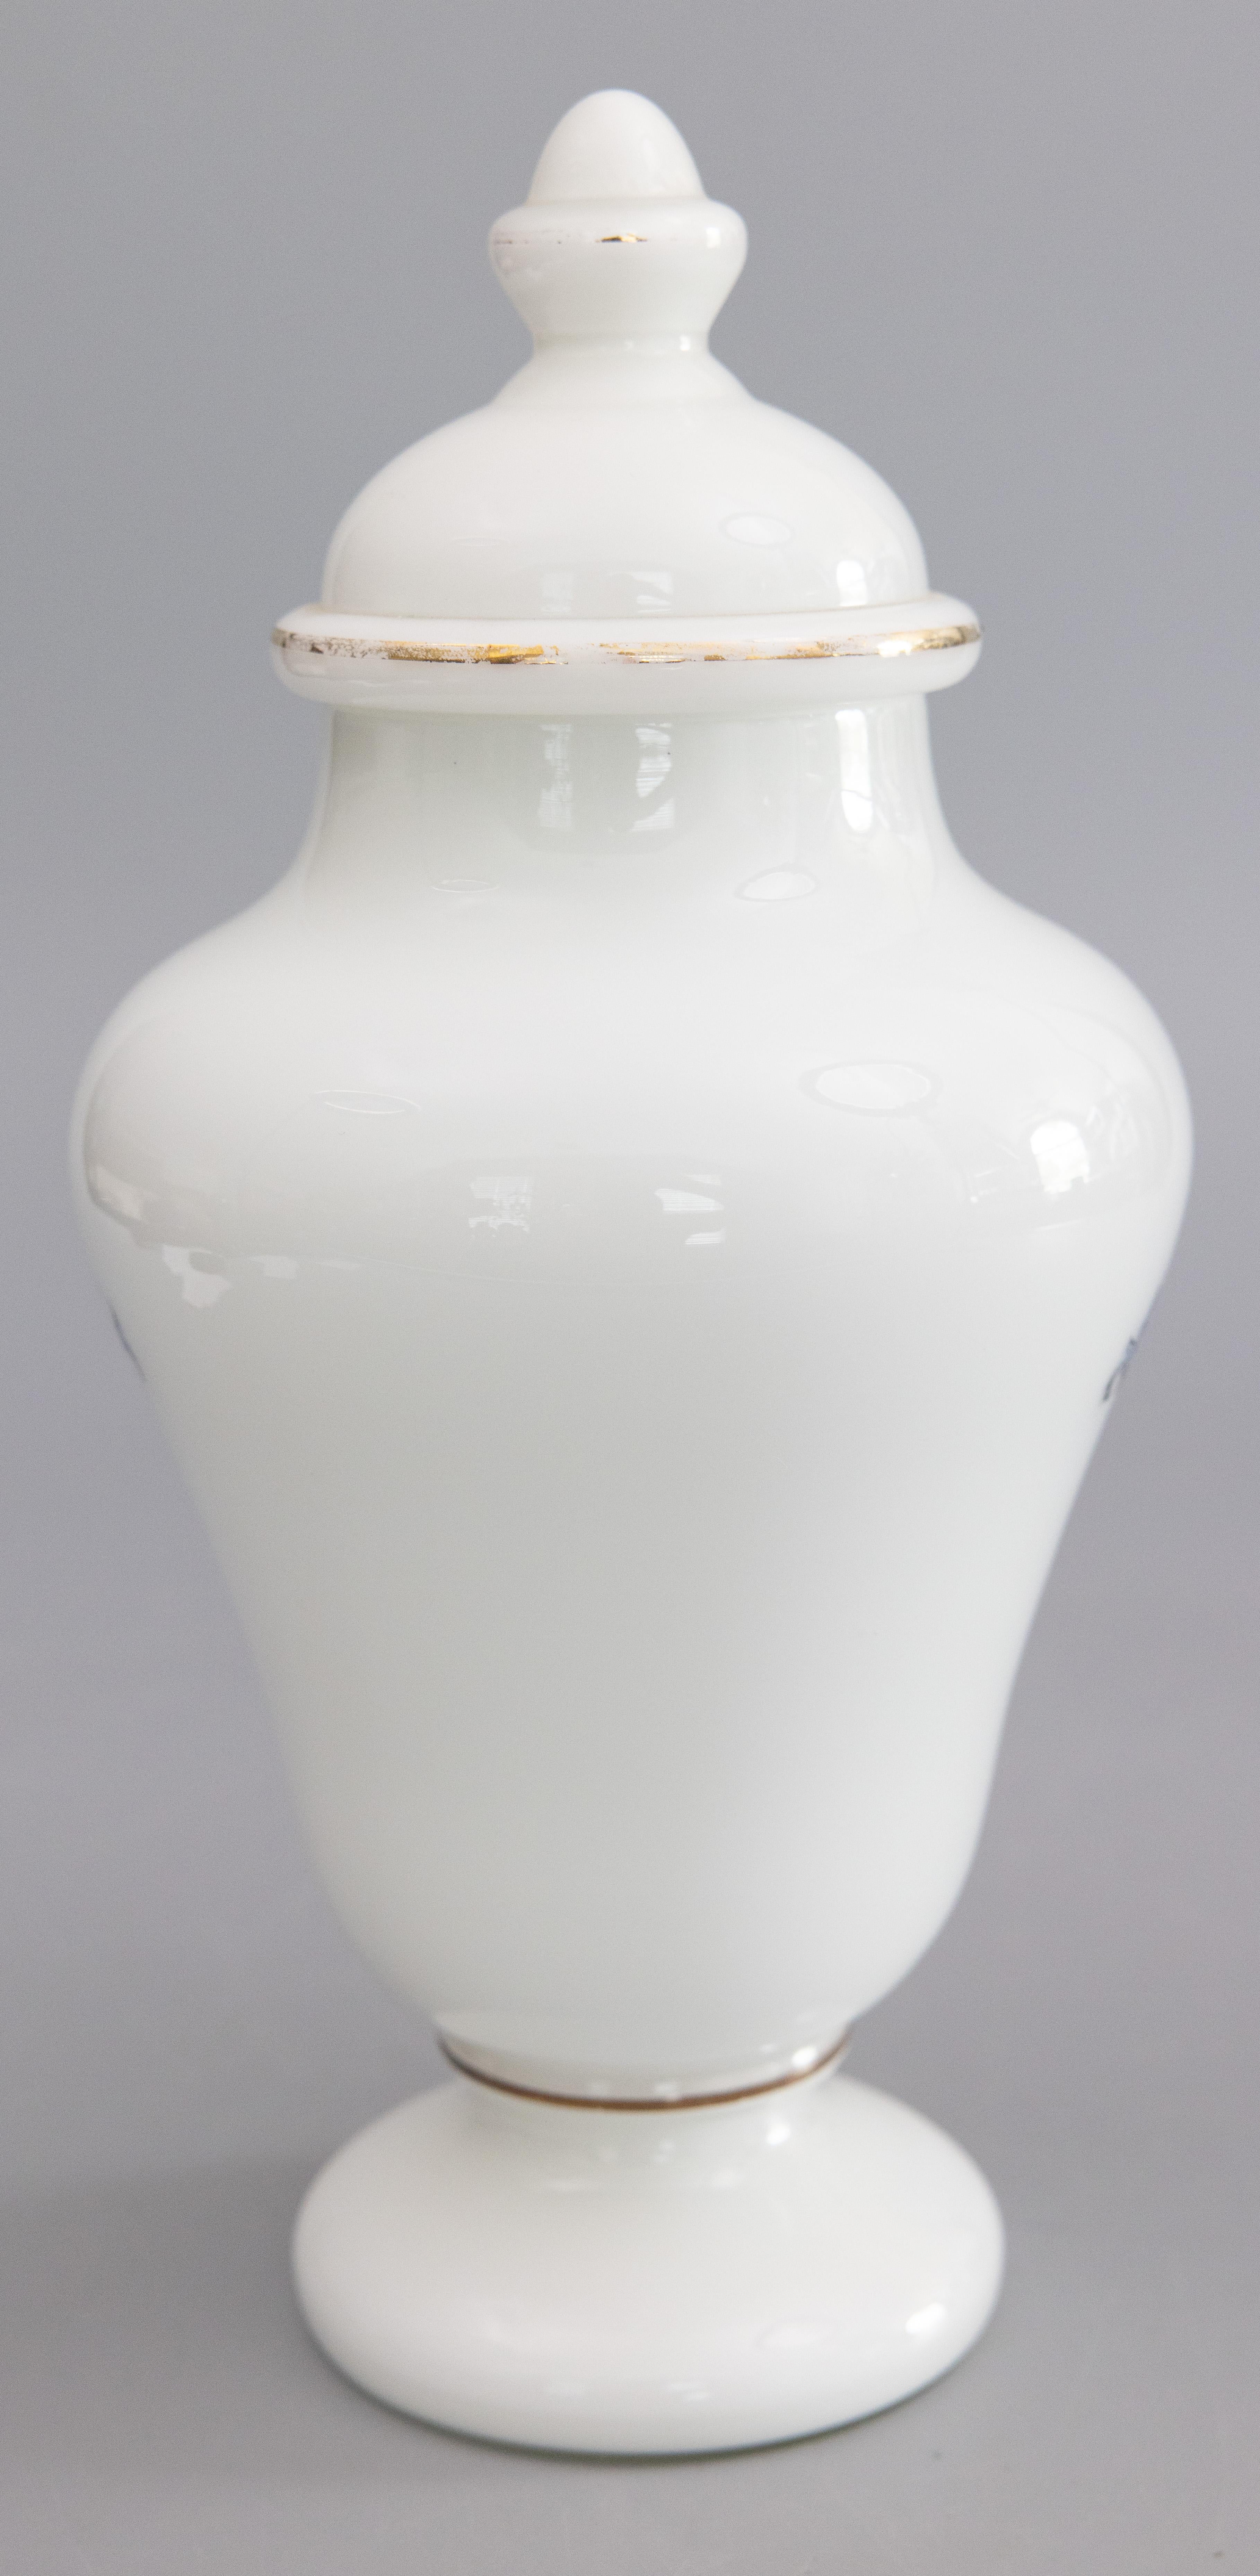 Antique French White Glass Lidded Apothecary Jar In Good Condition For Sale In Pearland, TX